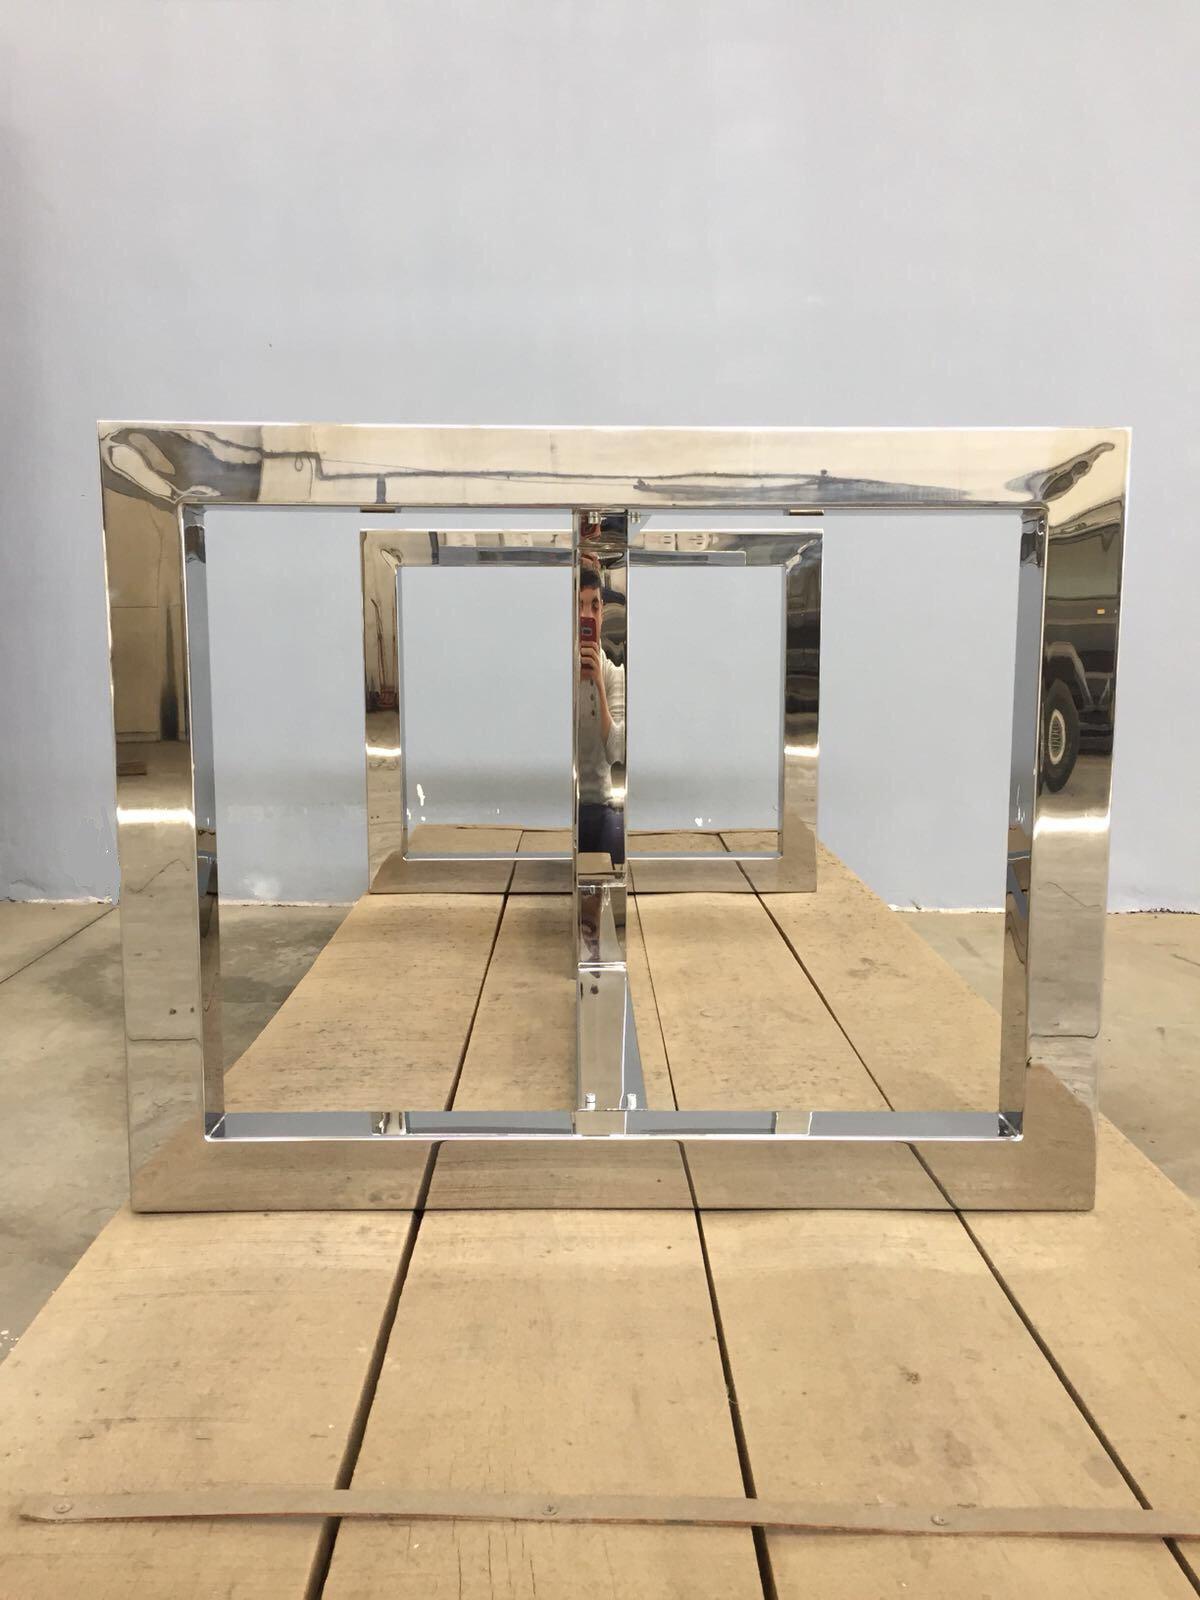 28" X 28" X 24” Table Base, Stainless Steel, Height 26" 32" Set(2)